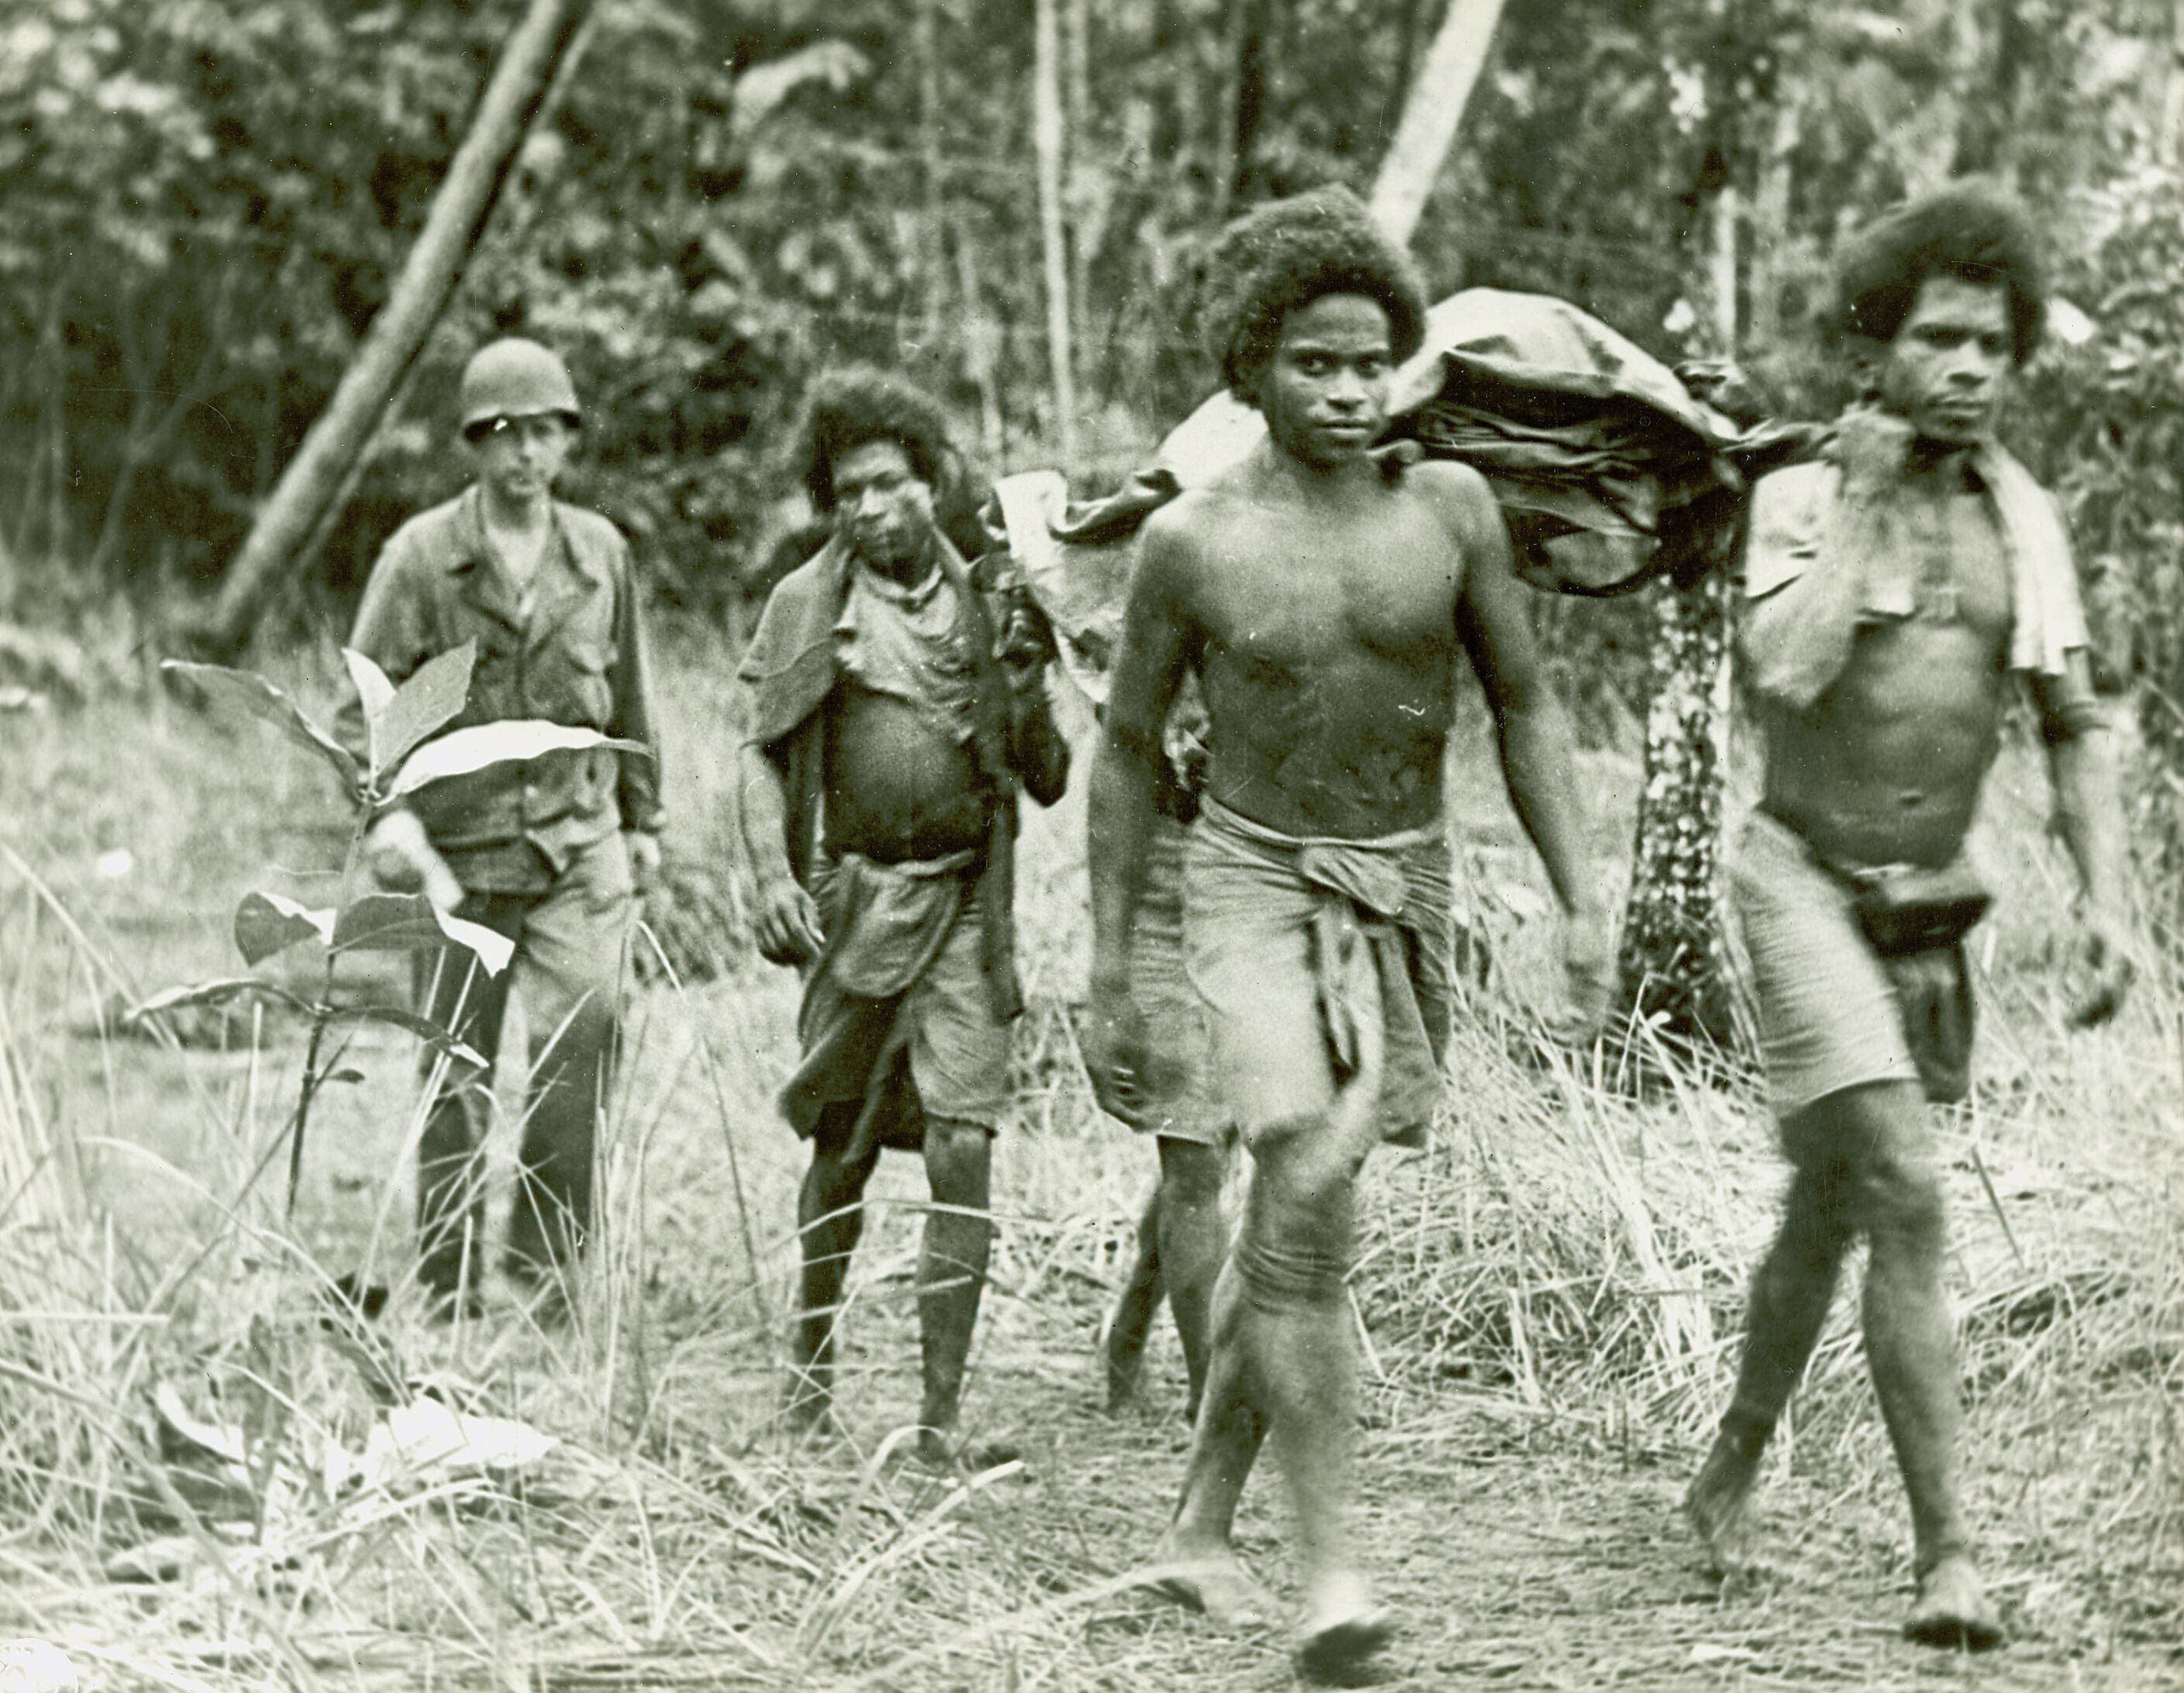 A group of men walking through a forest in Papua New Guinea.